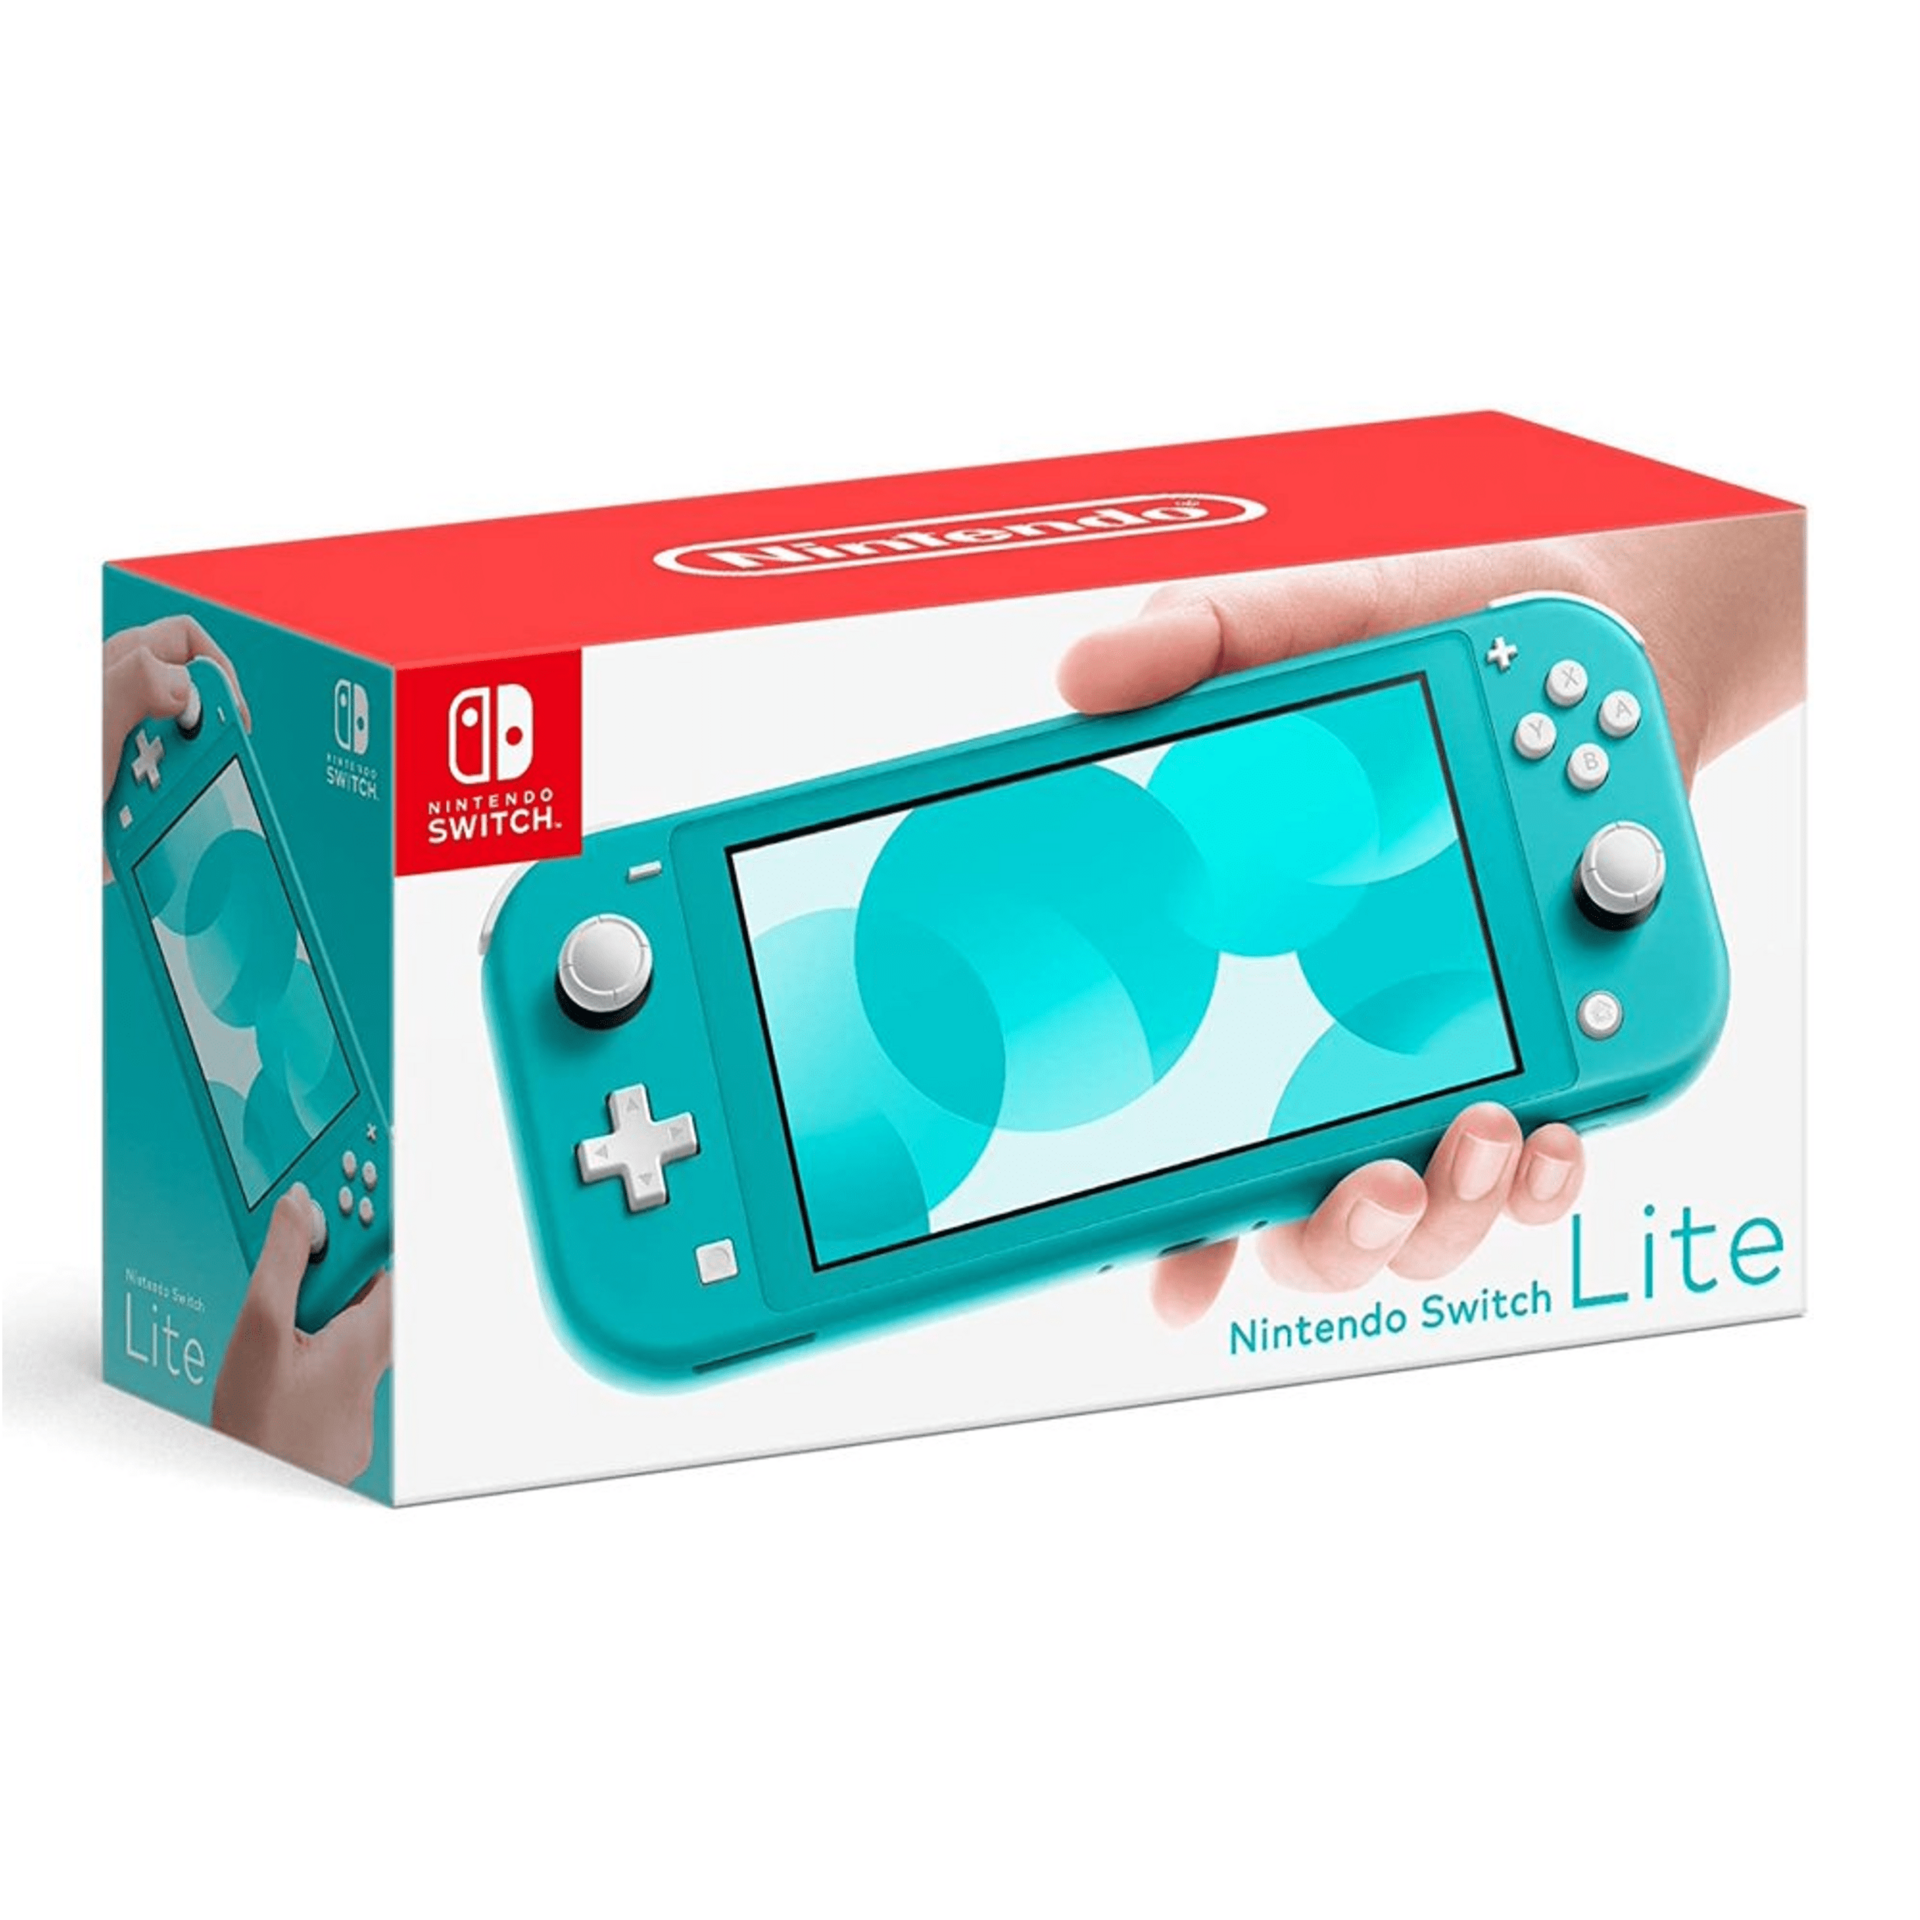 Nintendo Switch Lite Console - Turquoise [Complete]